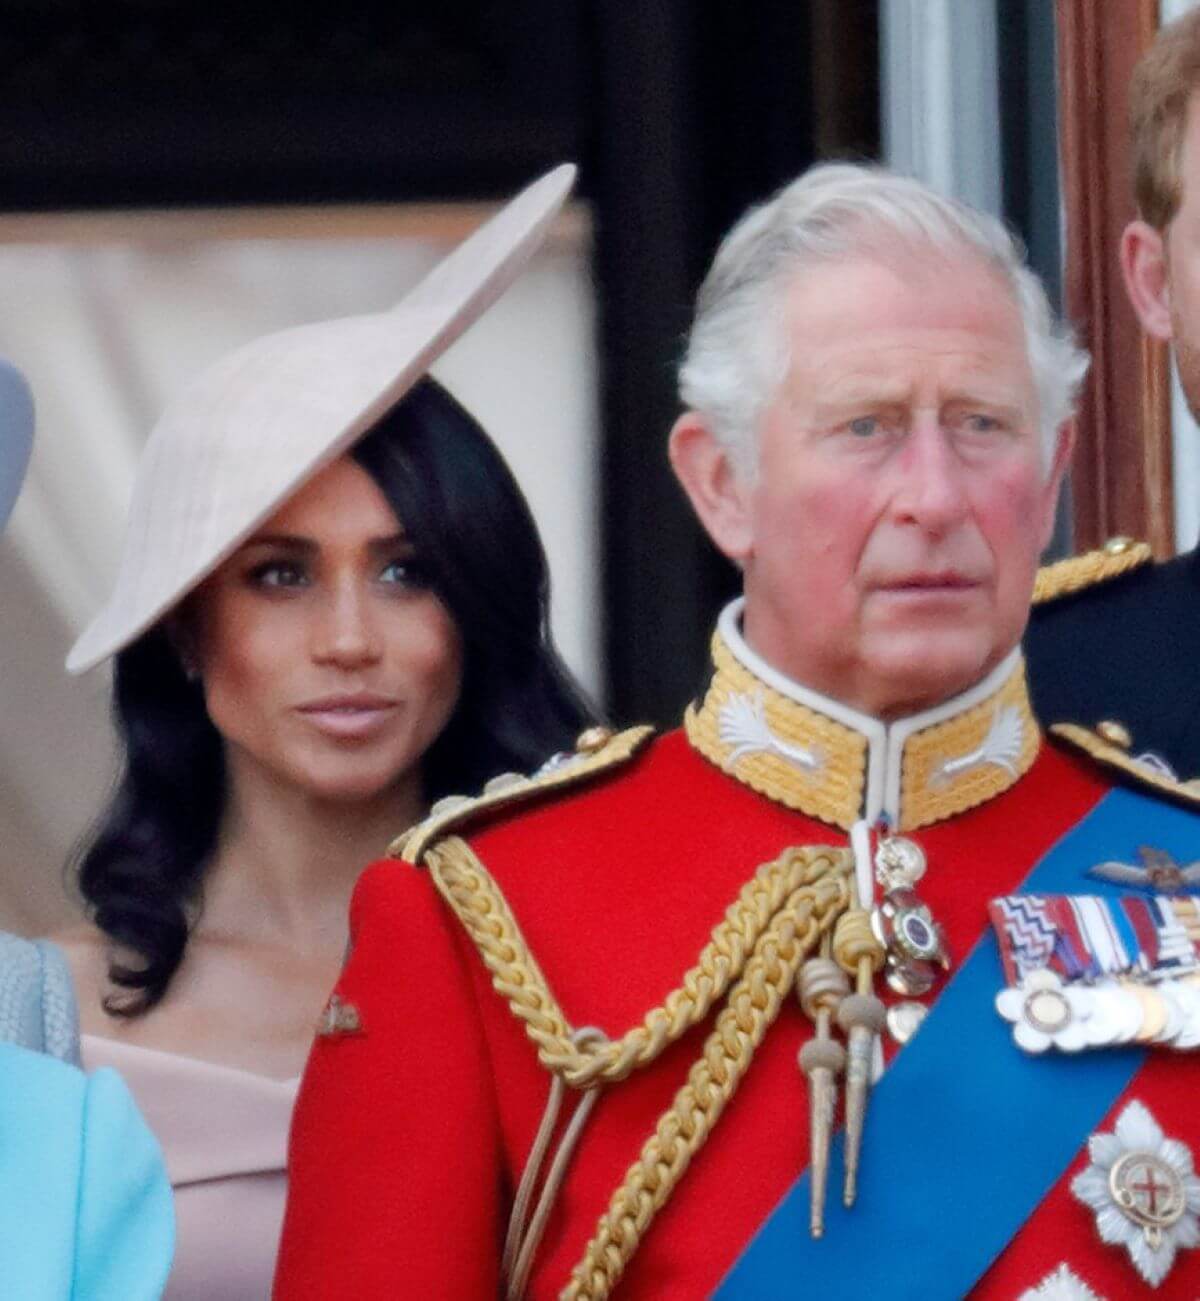 Meghan Markle and now-King Charles III standing on the balcony of Buckingham Palace during Trooping The Colour 2018